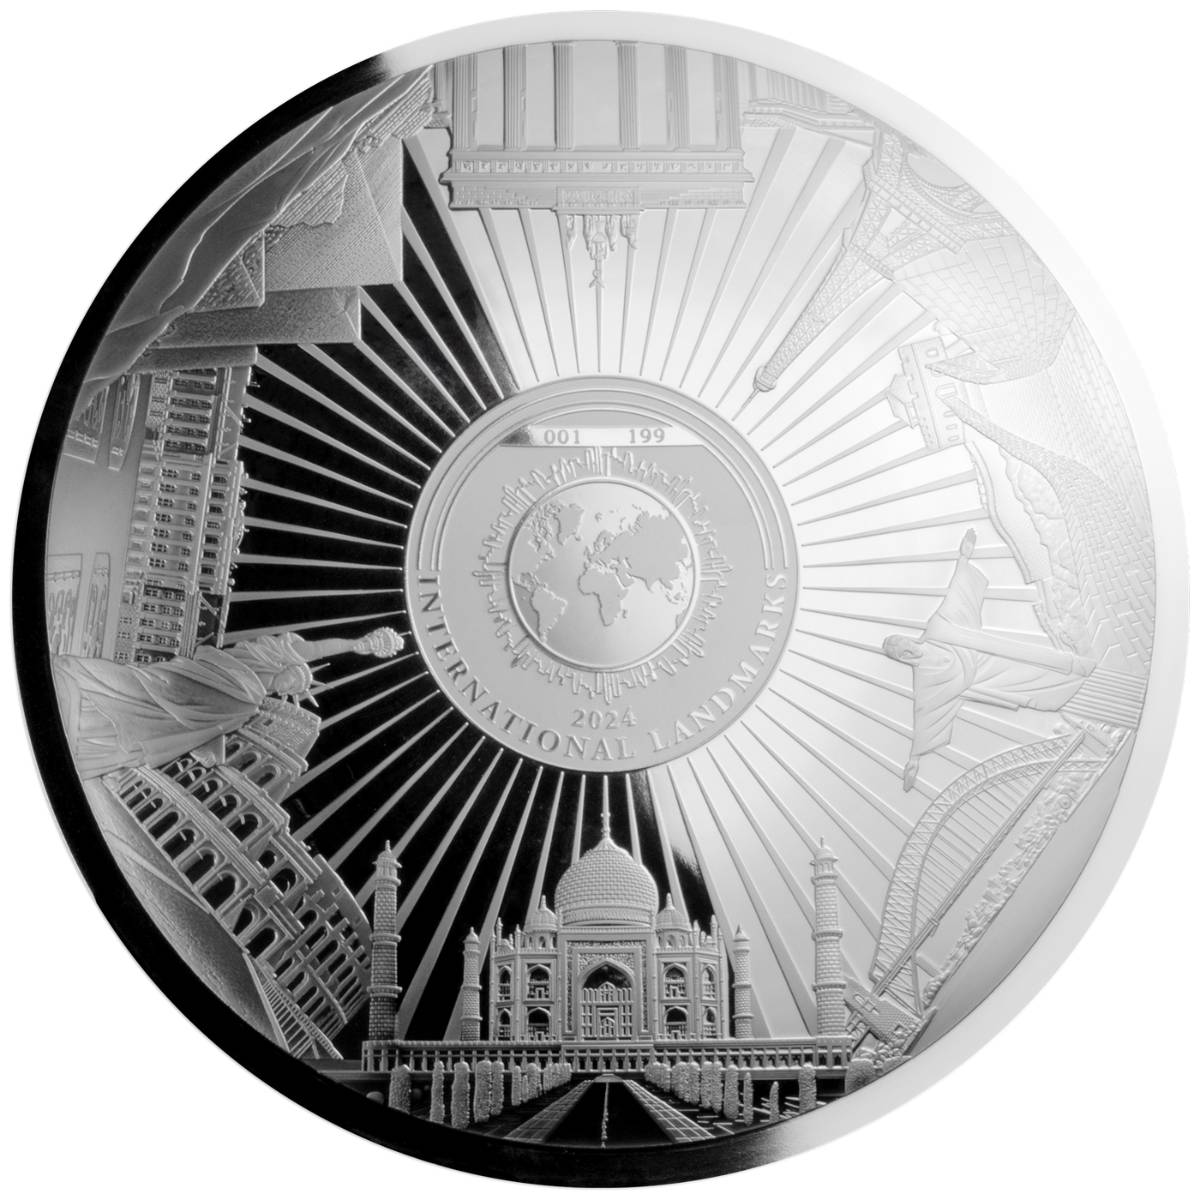 Landmarks of the World 2024 $25 Kilo Silver Prooflike Coin